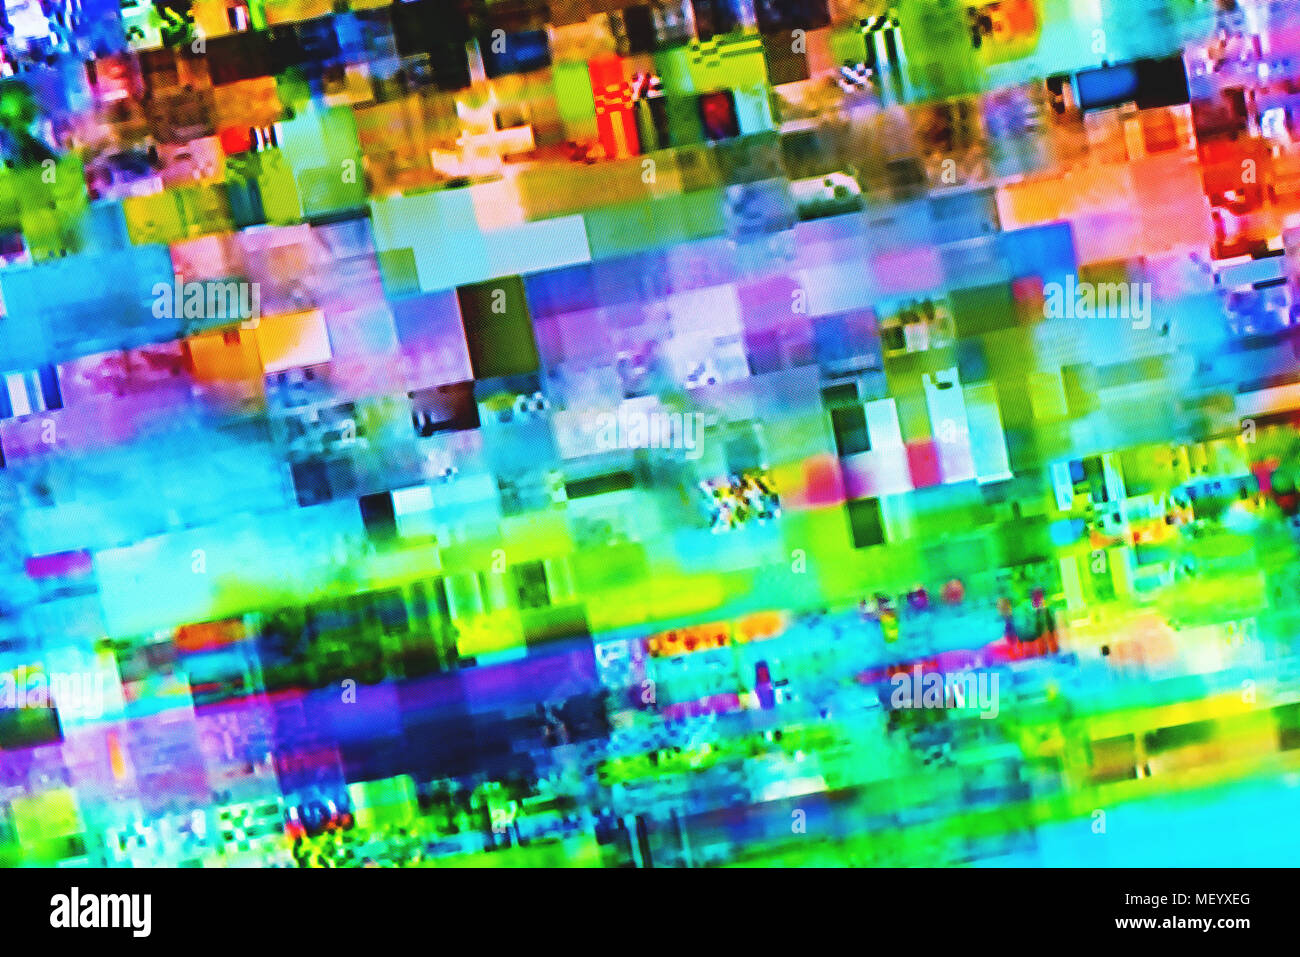 Digital TV glitch on television screen with misplaced squares, static effects and freezing problems during broadcast failure Stock Photo